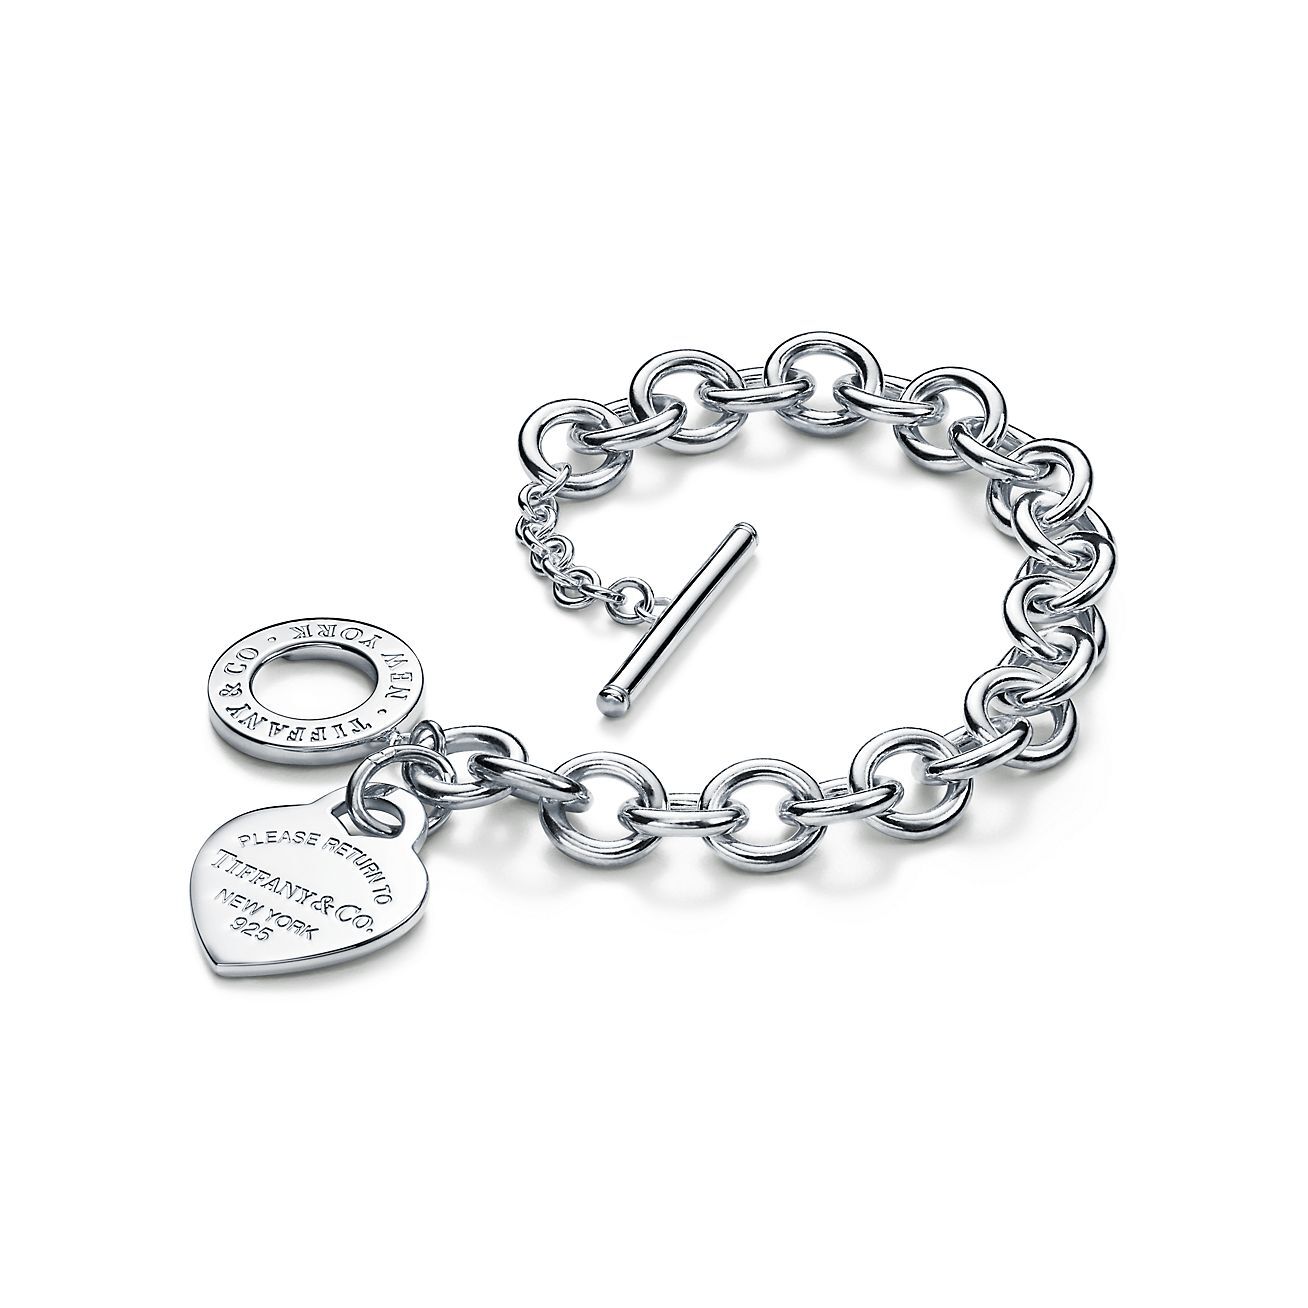 Aggregate more than 88 tiffany heart toggle bracelet latest - POPPY